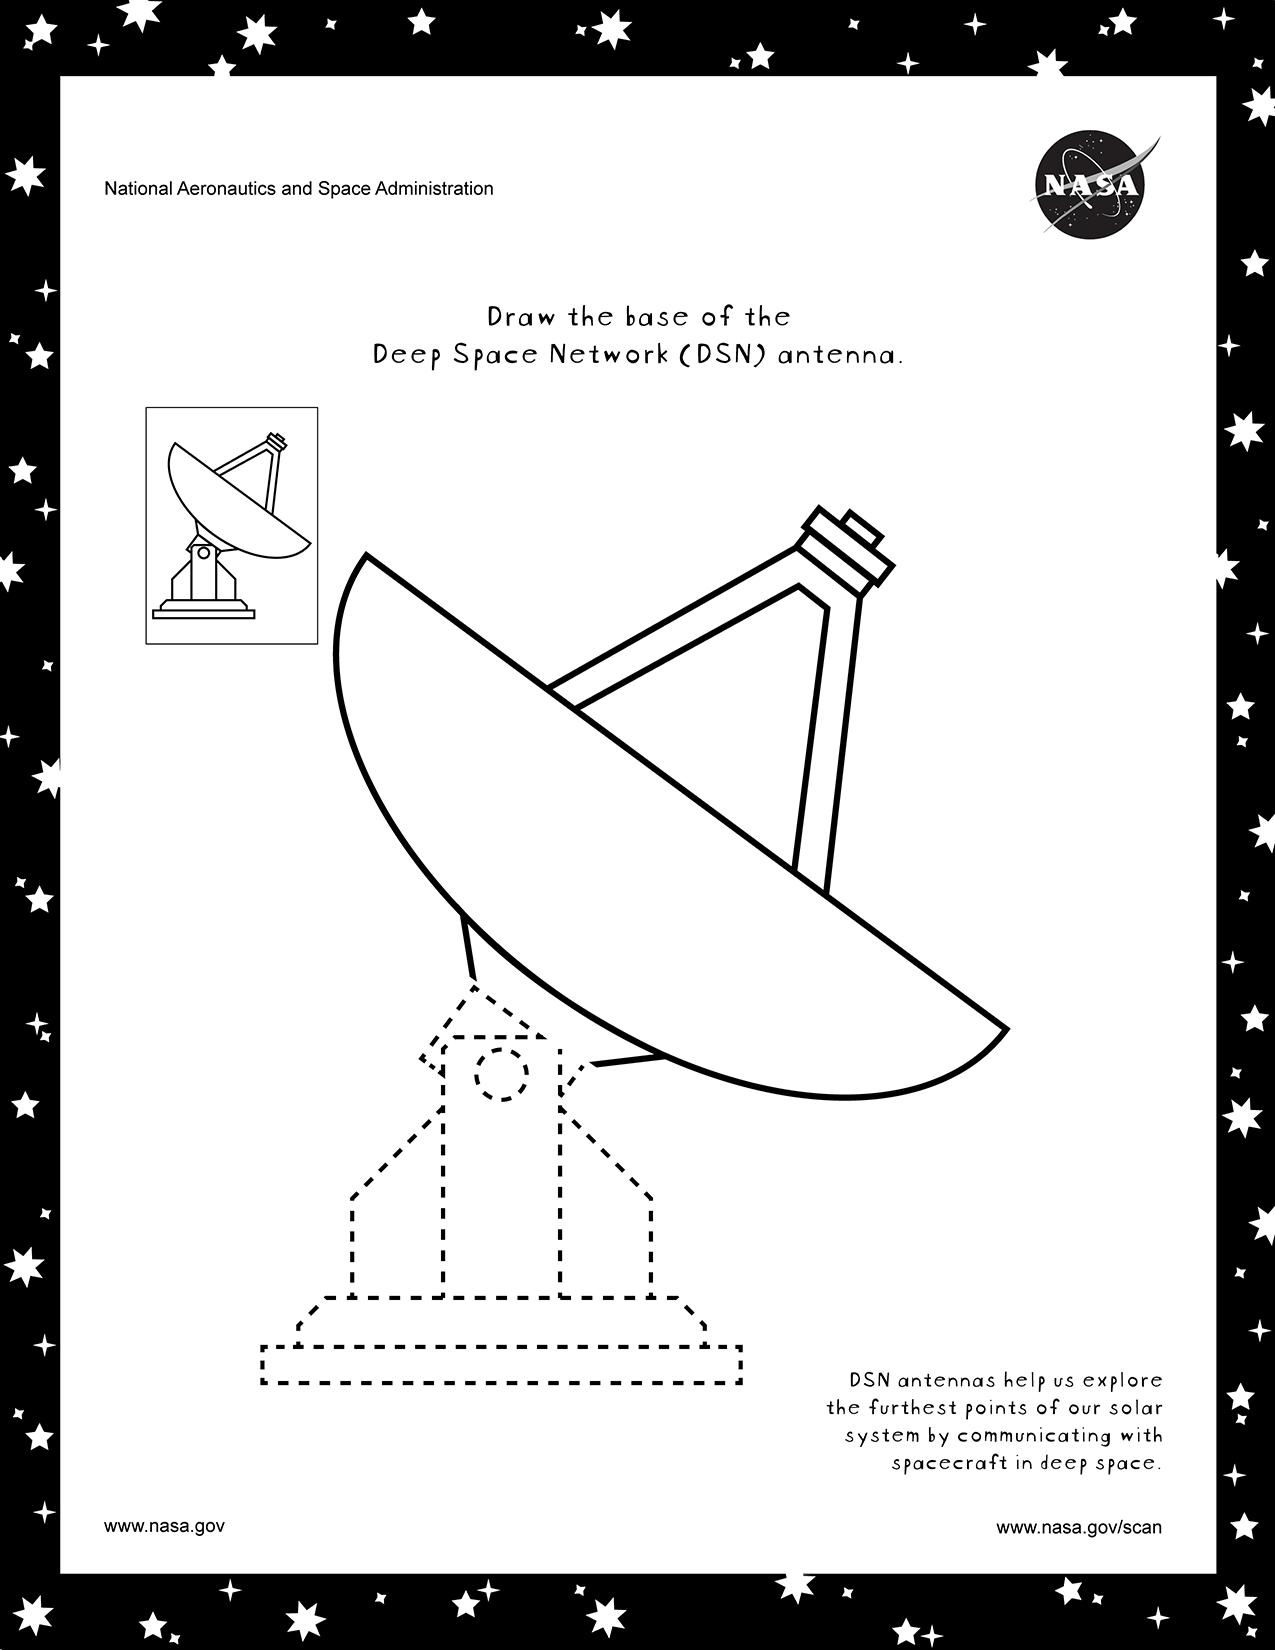 Coloring page for the DSN.